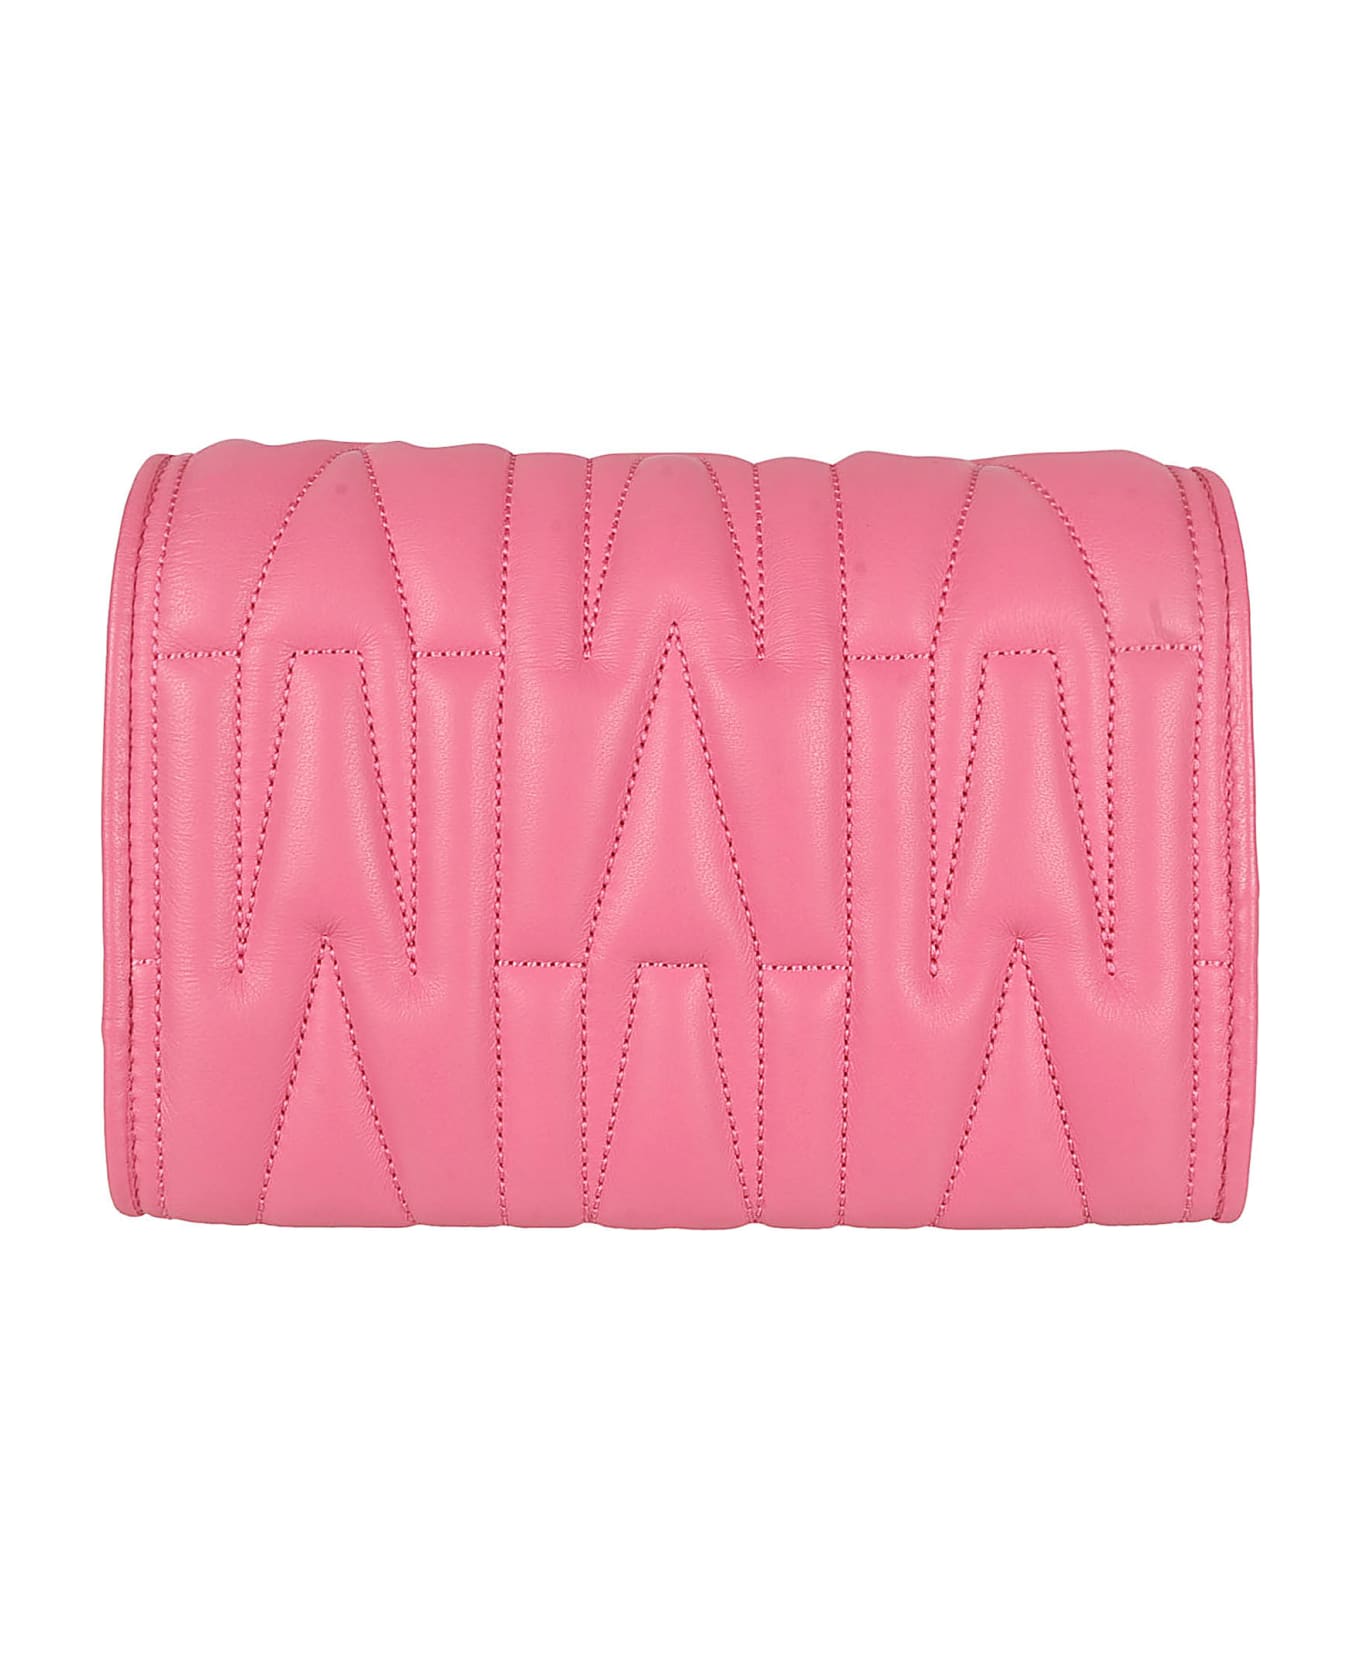 Moschino M Plaque Quilted Flap Chain Shoulder Bag - Pink